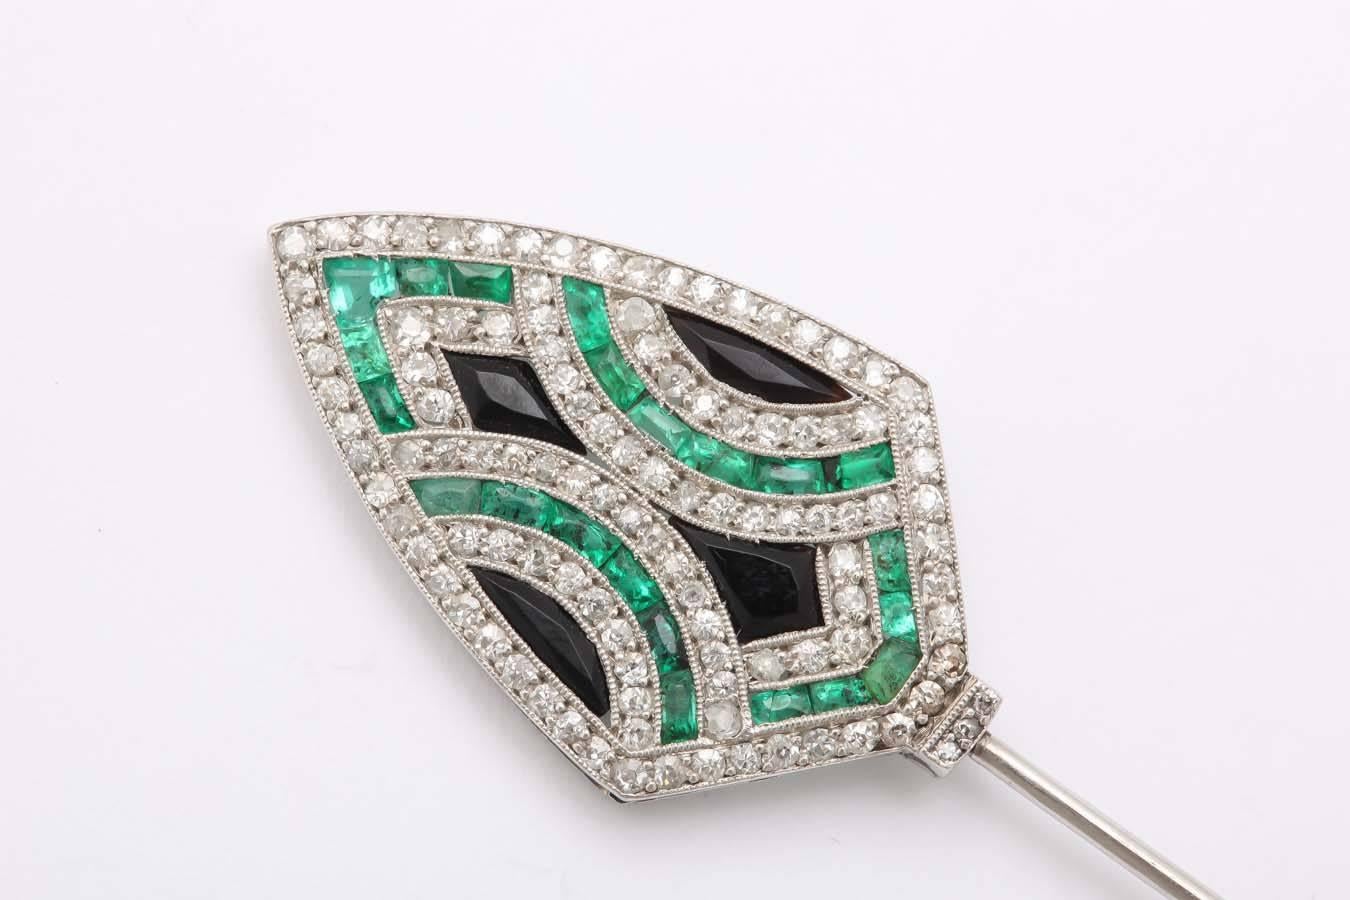 Of geometric design set with single-cut diamonds, french-cut emeralds and carved onyx.